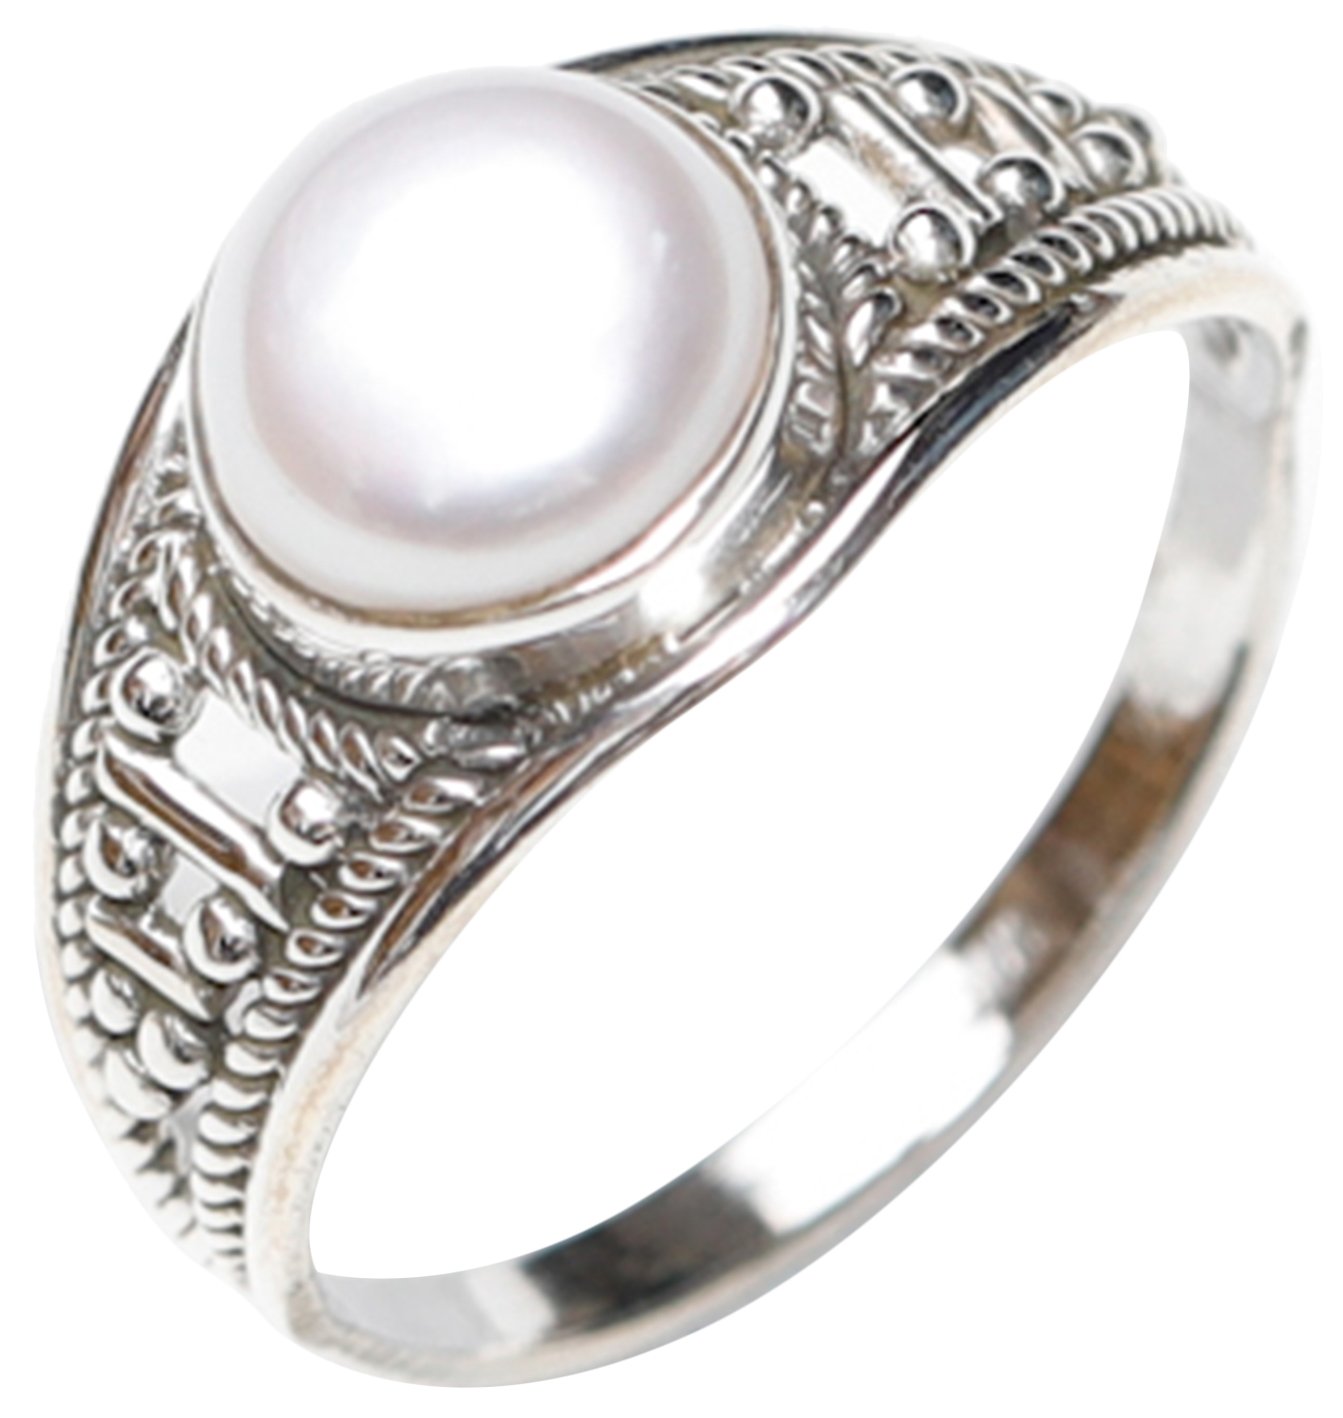 South Sea Pearl Ring in 18k Solid Gold - Gleam Jewels